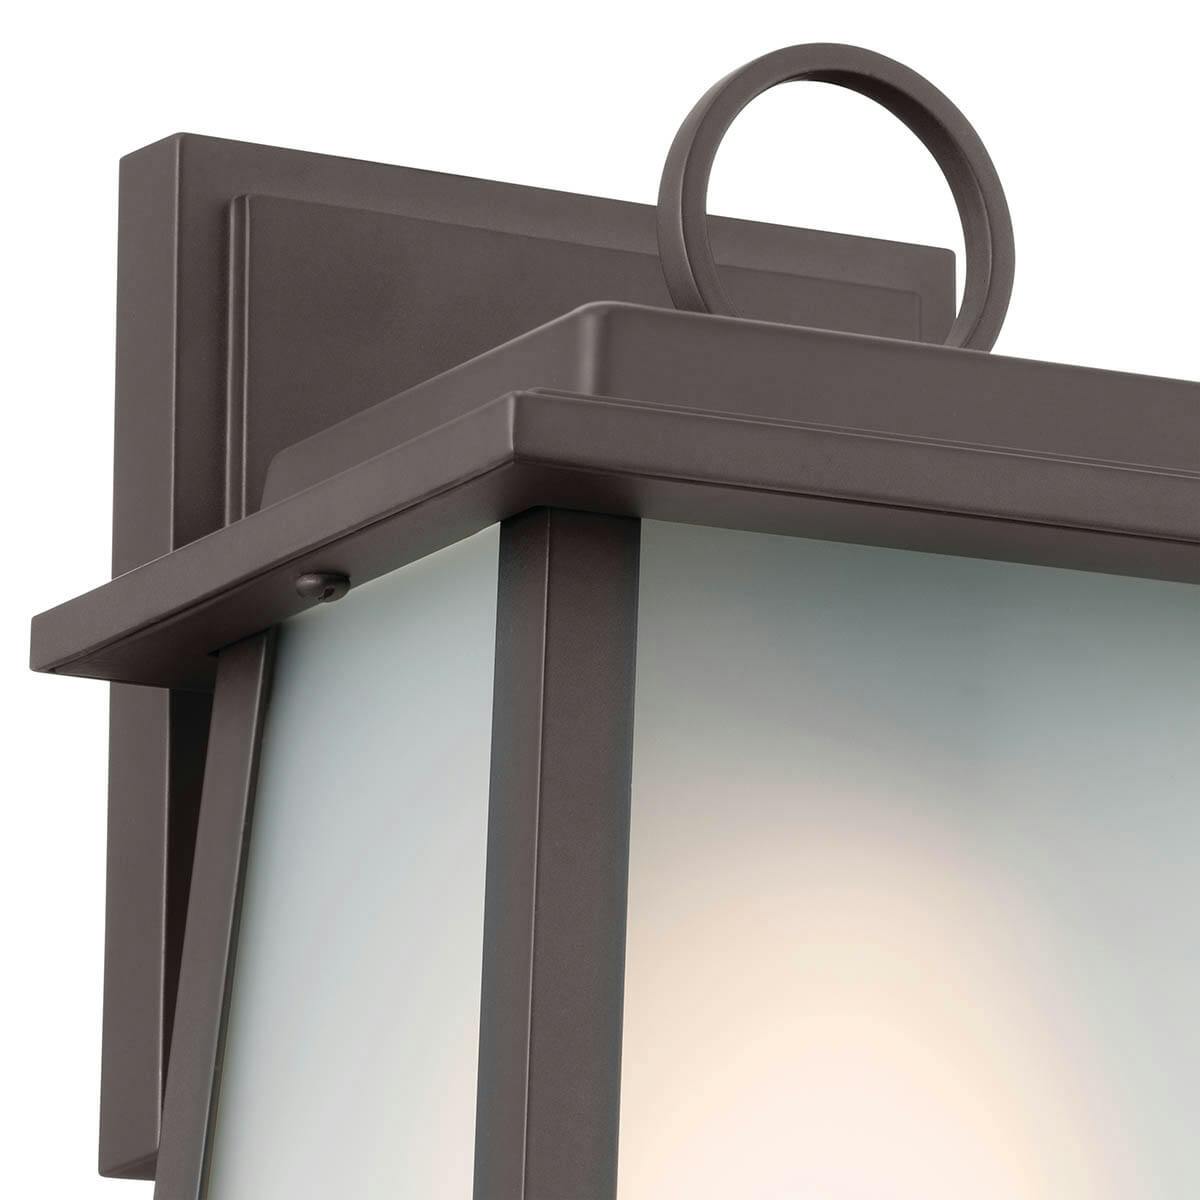 Close up view of the Noward 9" 1 Light Wall Light Olde Bronze® on a white background